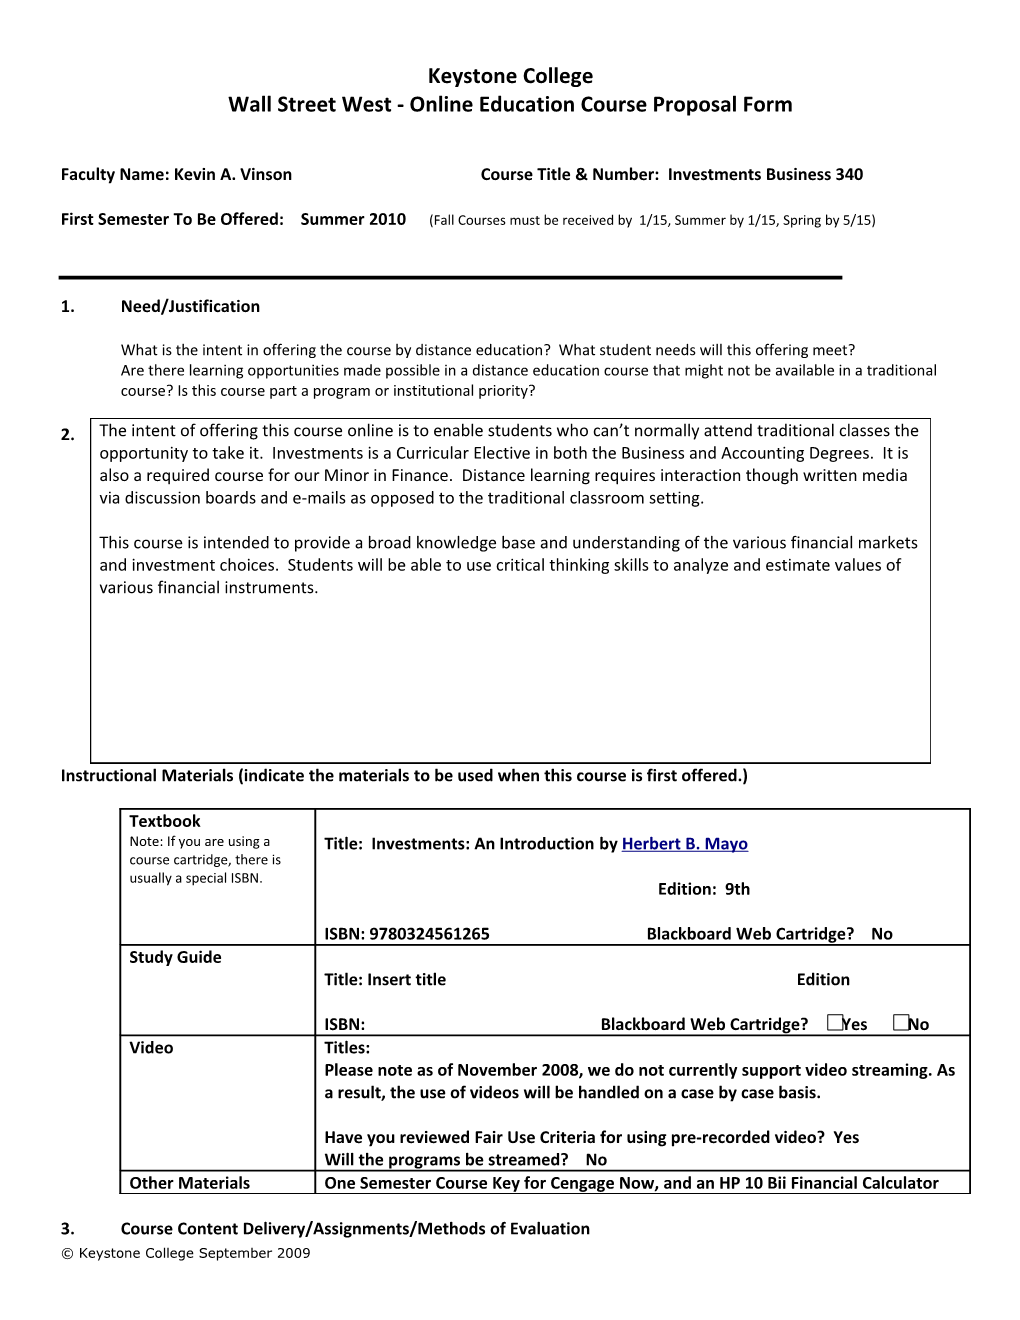 Wall Street West - Online Education Course Proposal Form